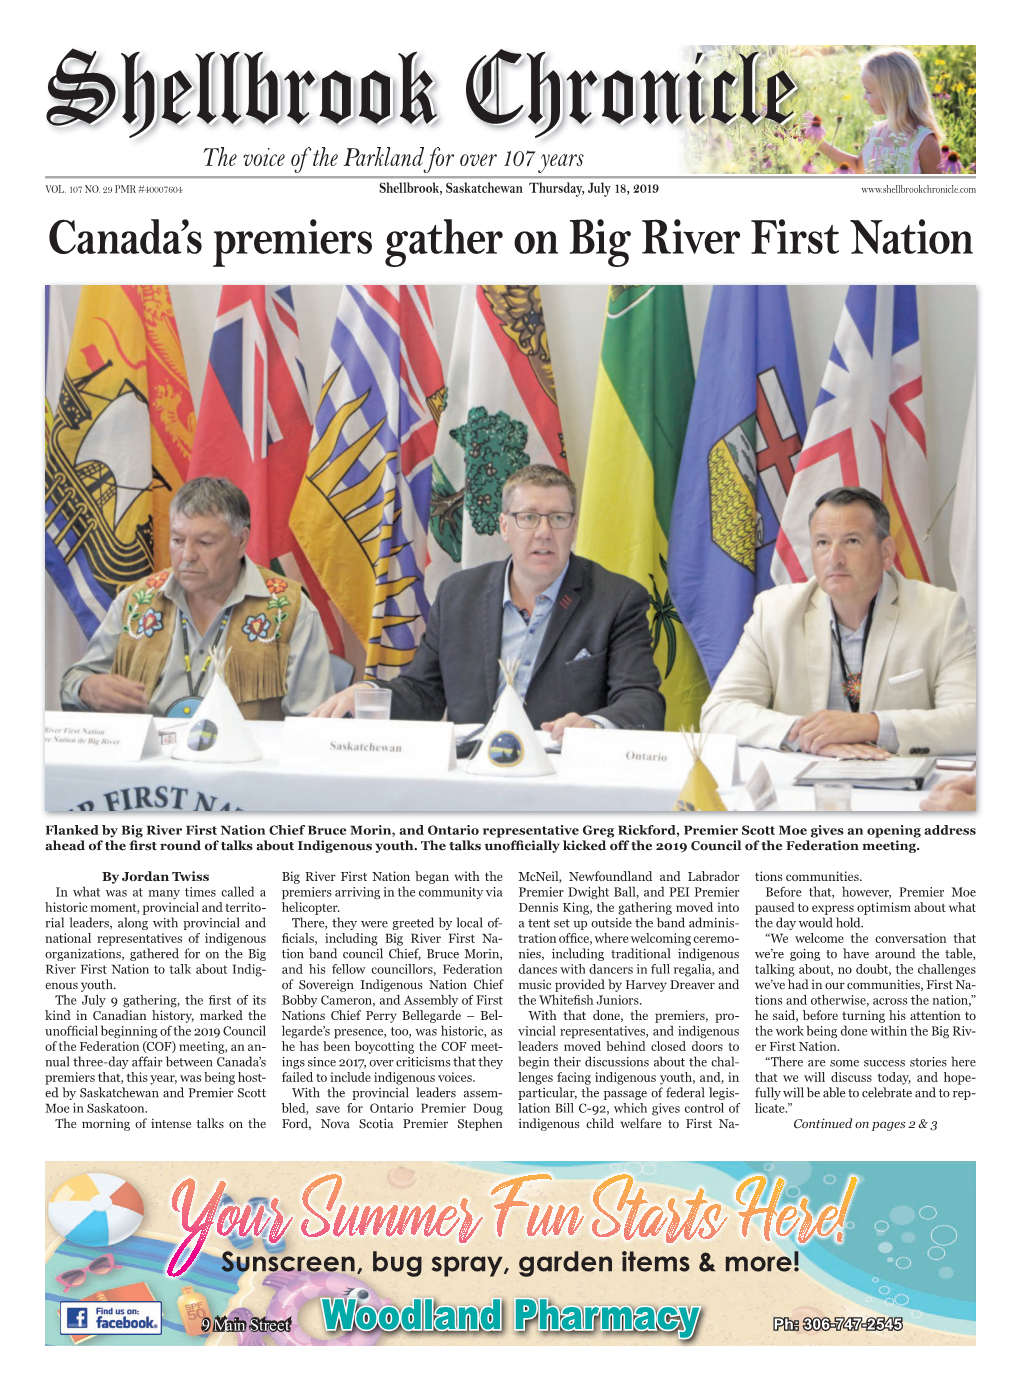 Canada's Premiers Gather on Big River First Nation